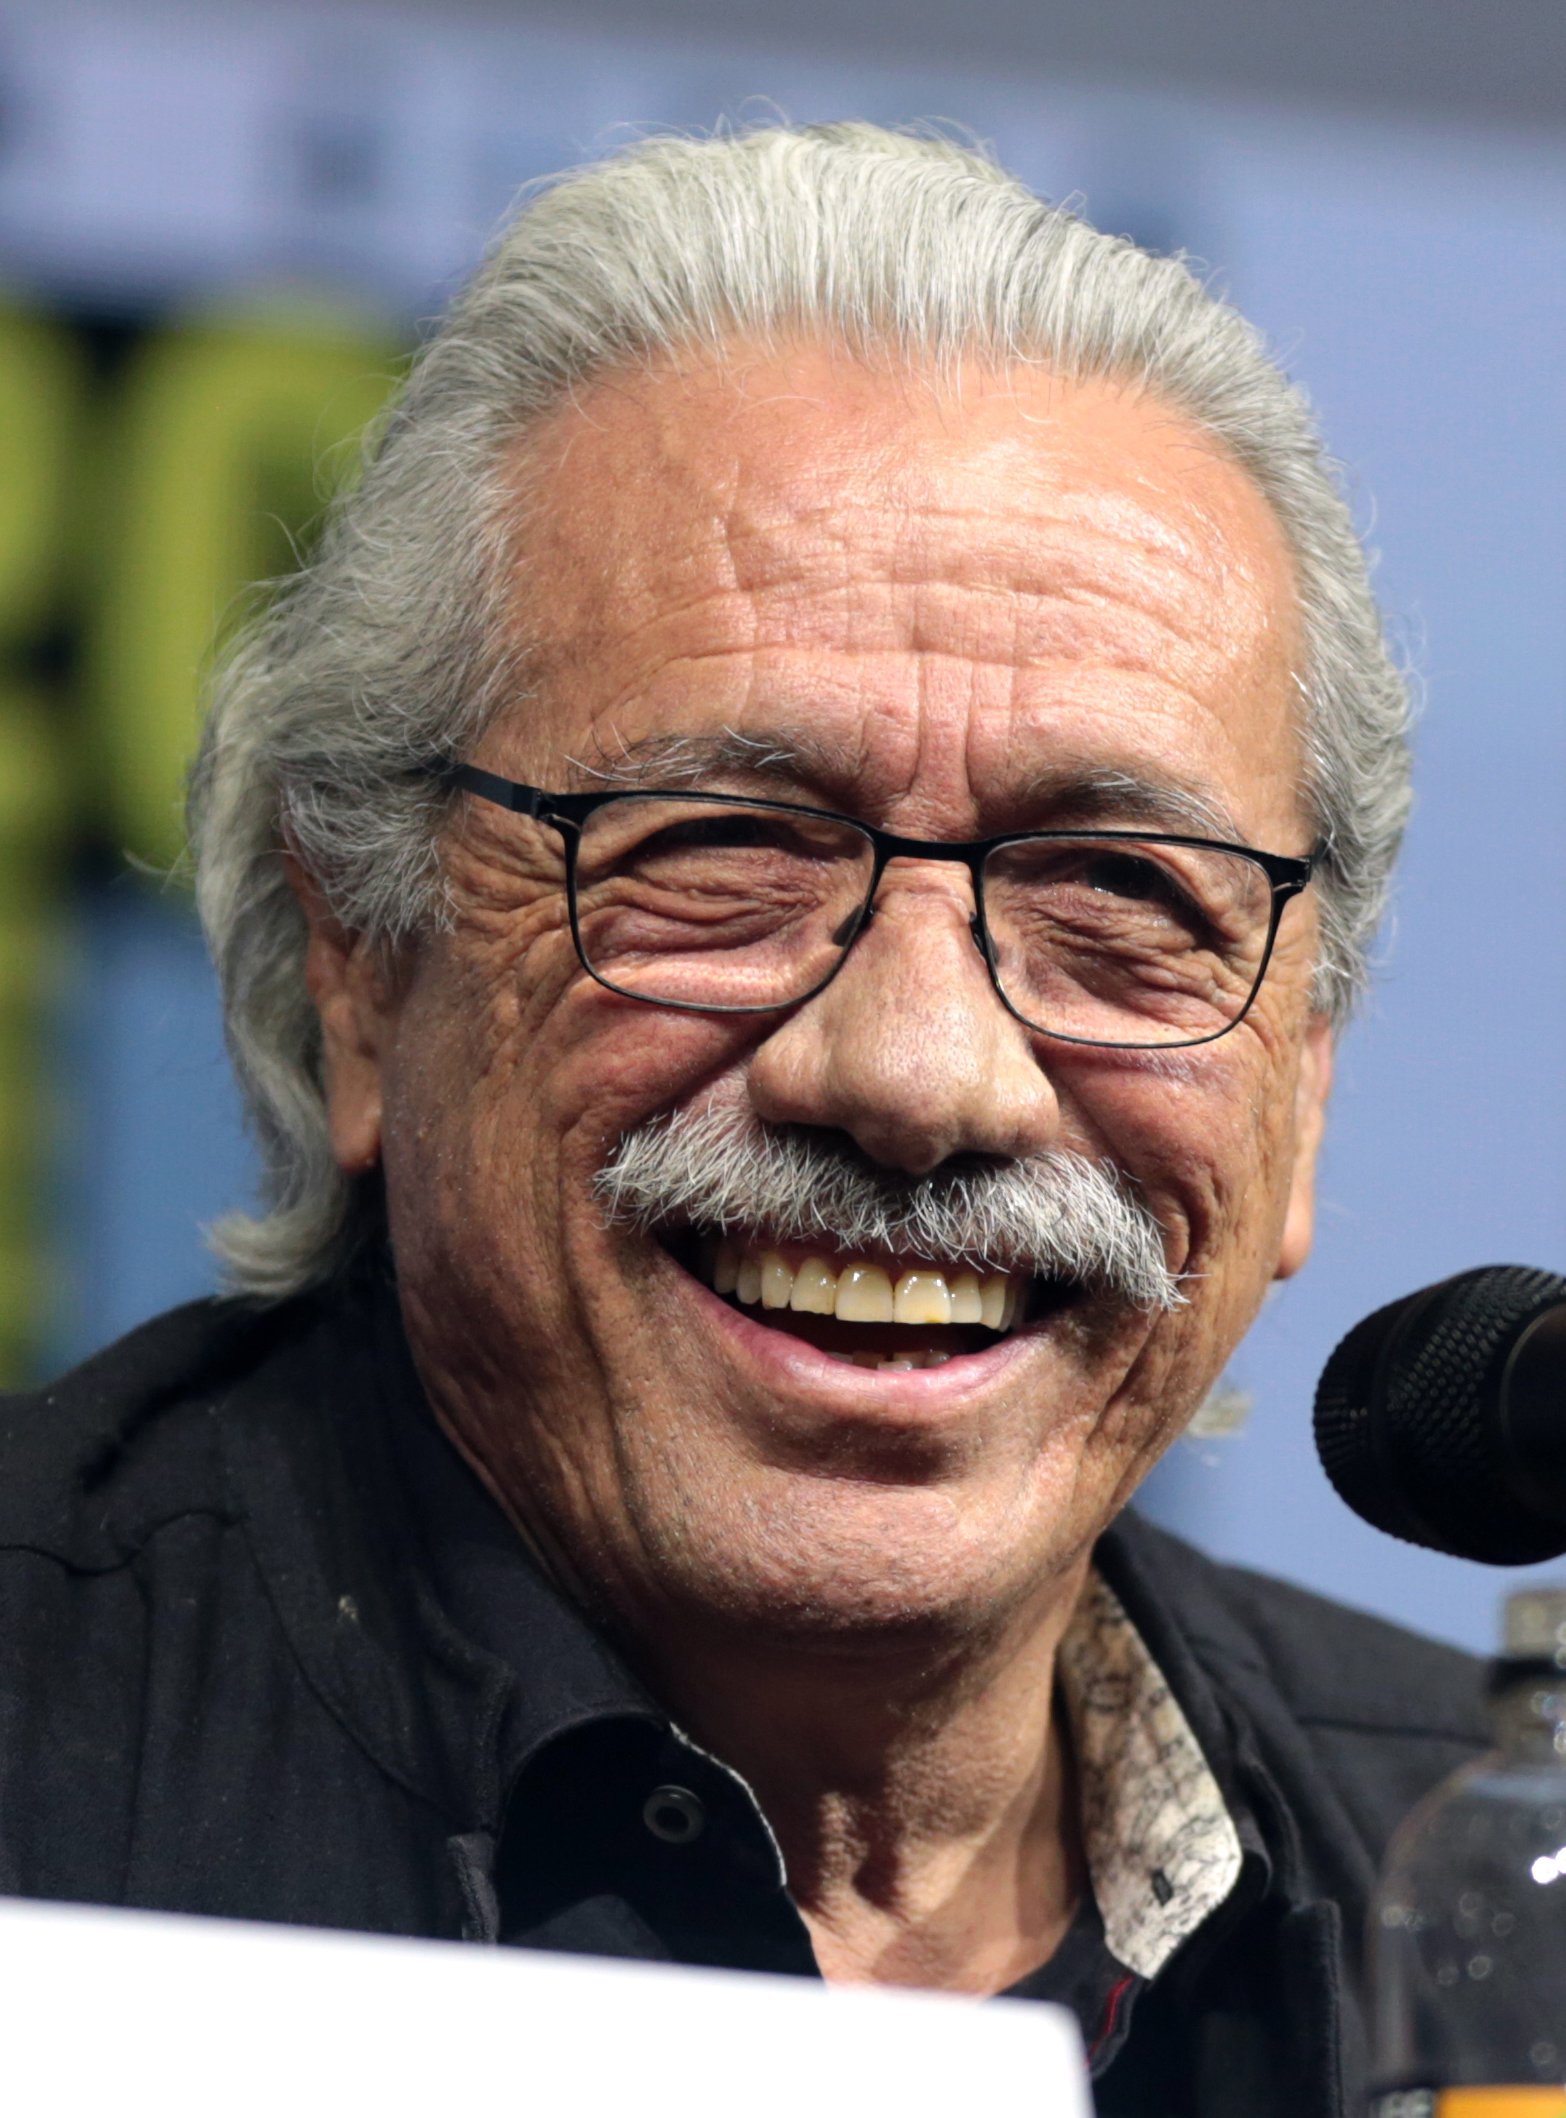 What Is Edward James Olmos’s Zodiac Sign? - AstrologySpark